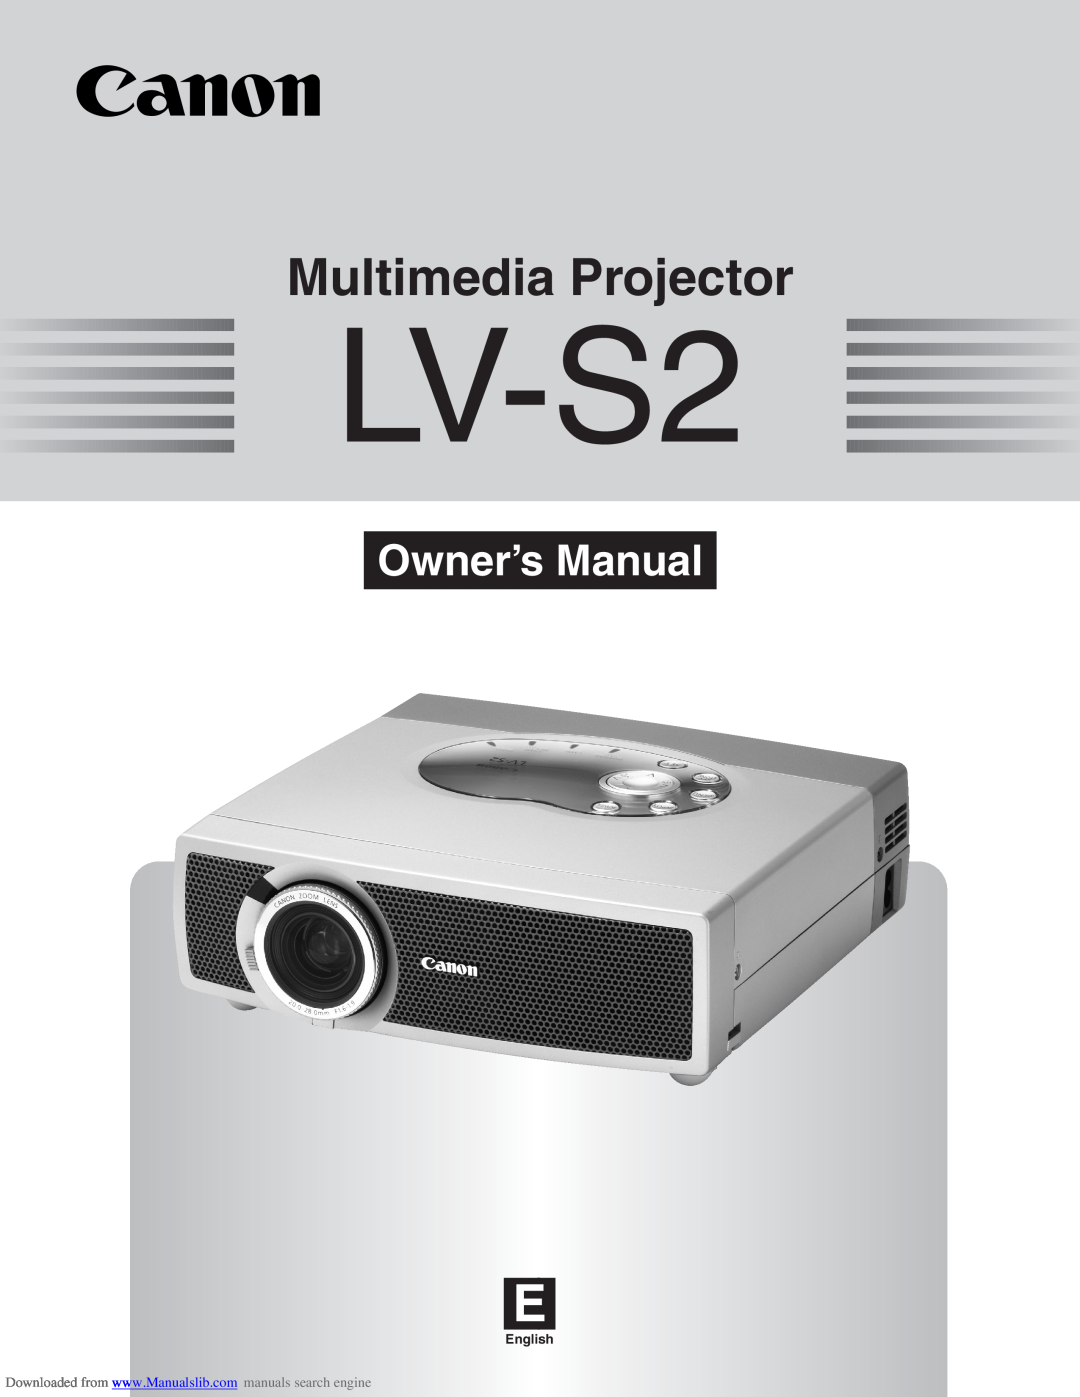 Canon LV-S2 owner manual Multimedia Projector, Owner’s Manual, English 